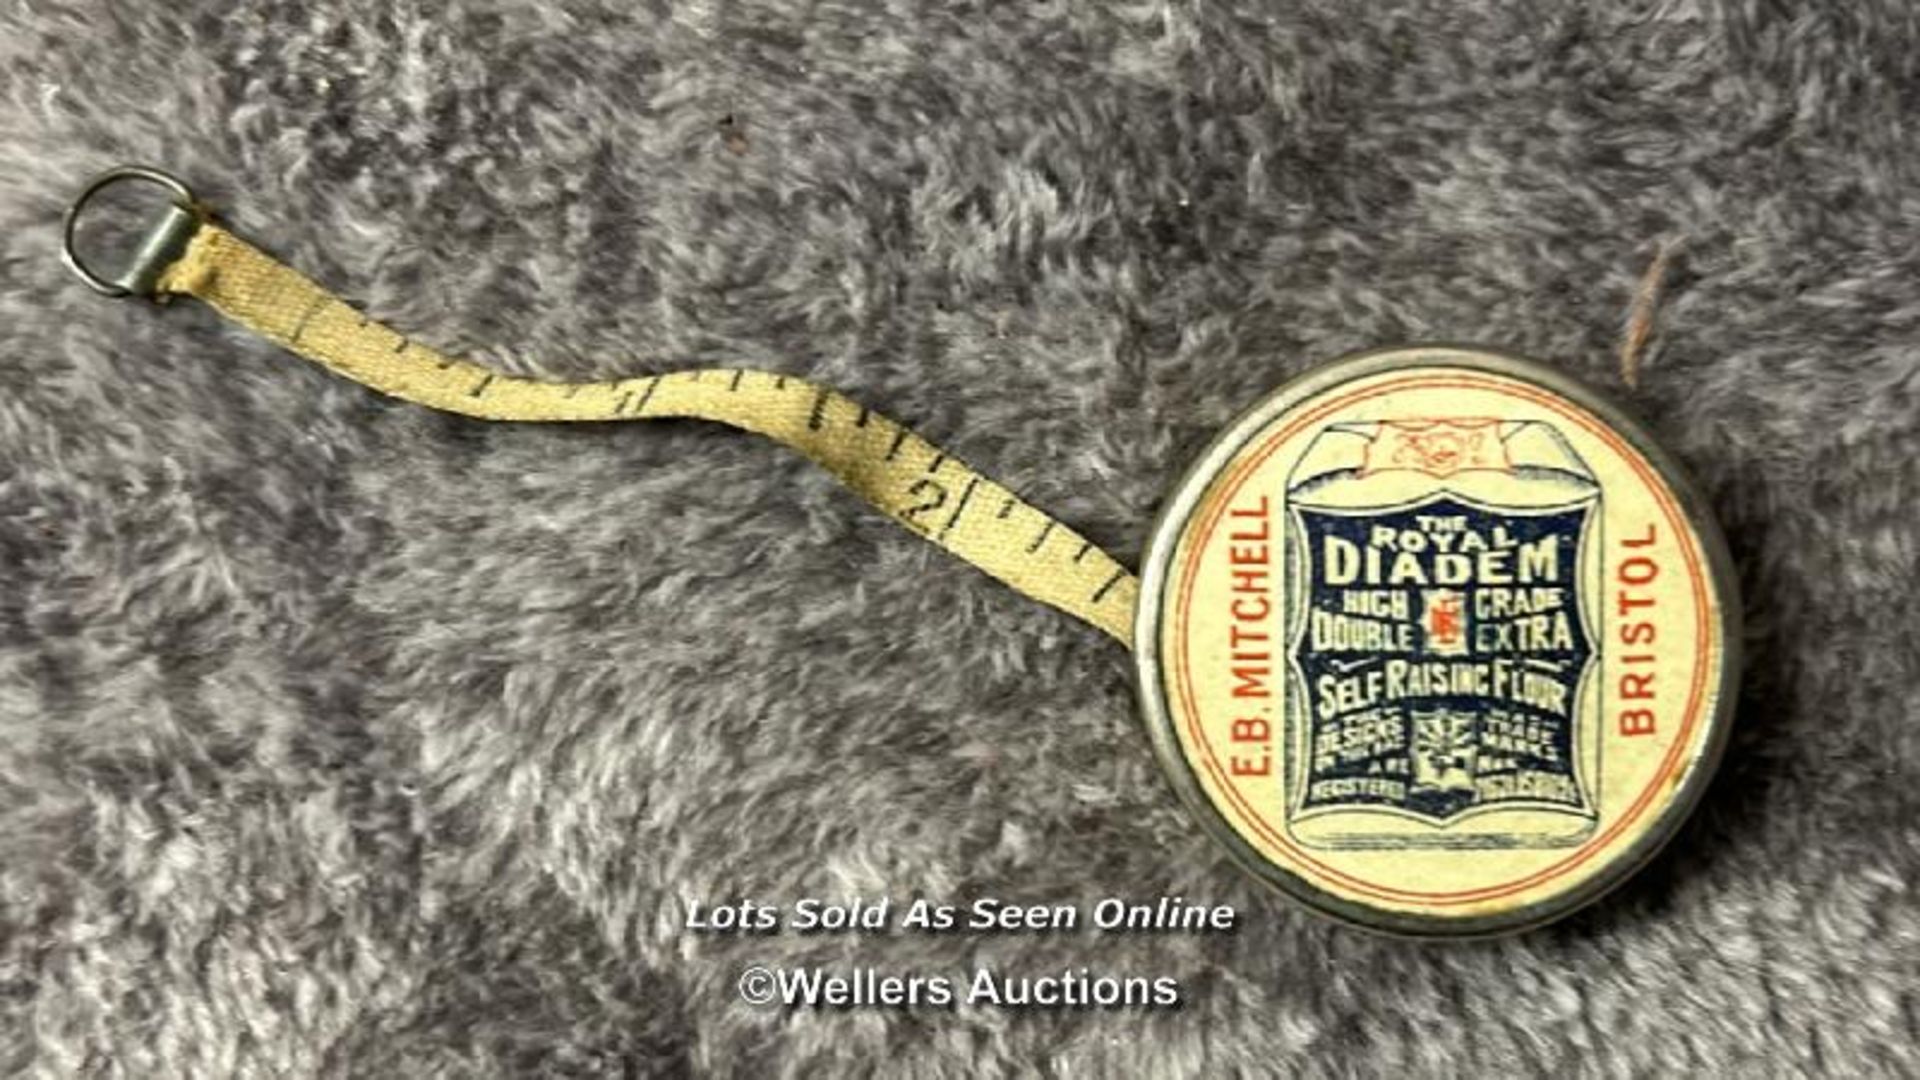 Vintage brass lawn tennis measure, small E.B Mitchell 'The Royal Diadem' tape measure and two - Image 4 of 8